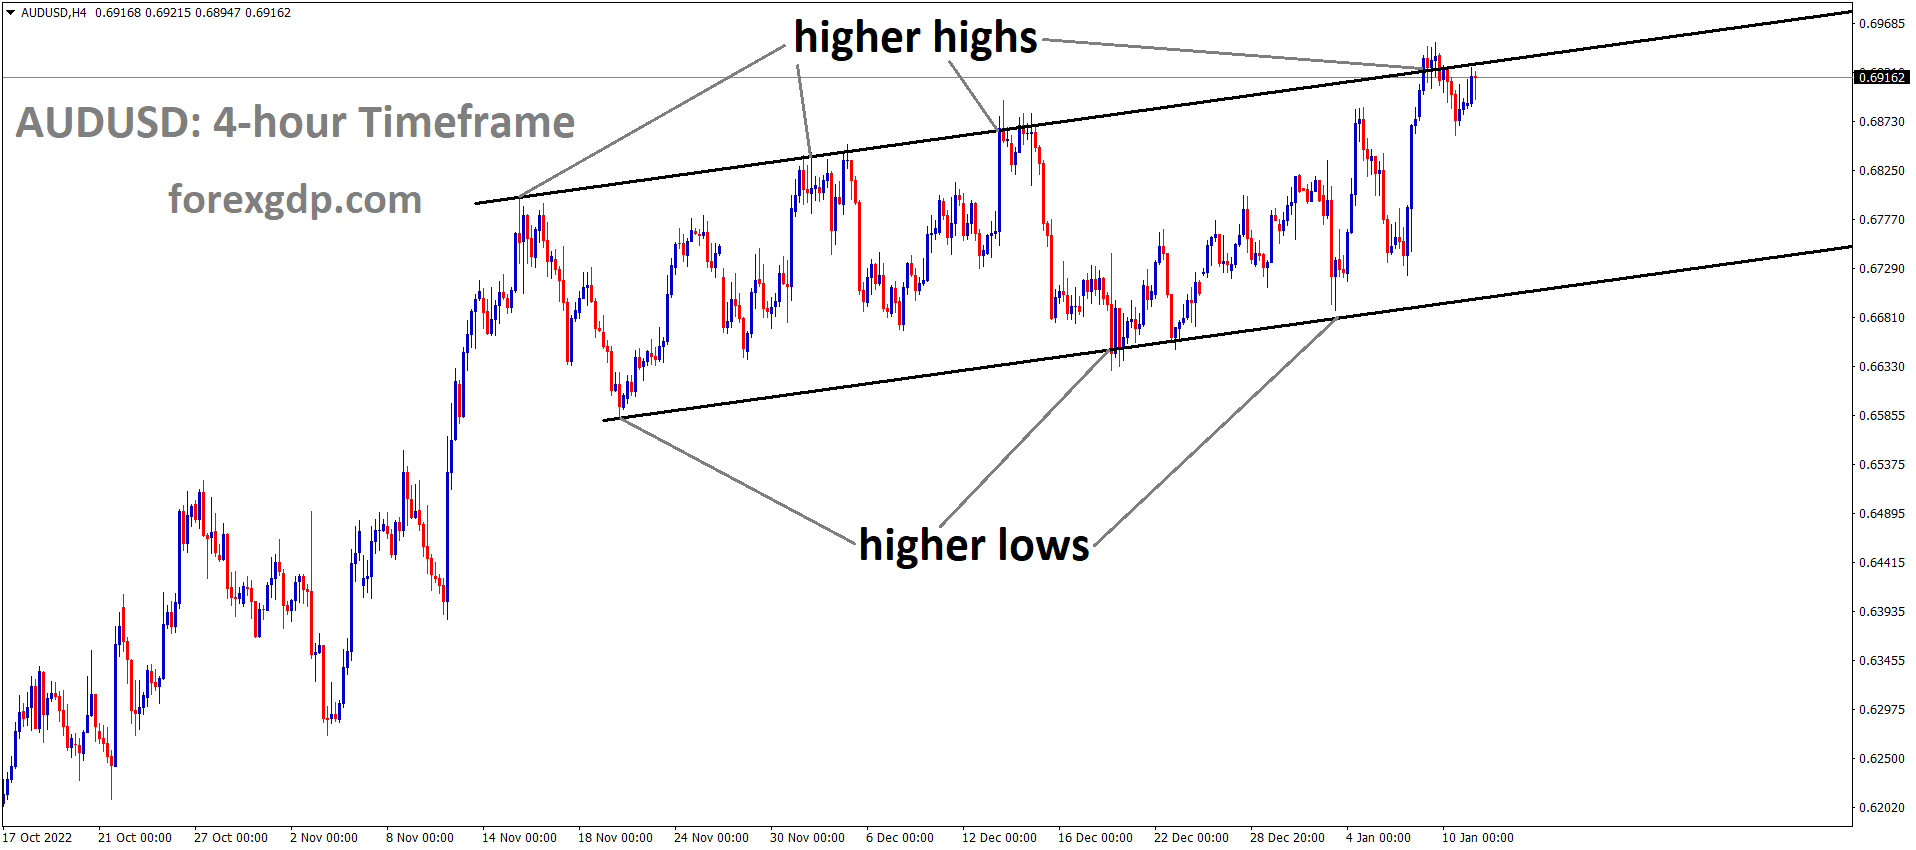 AUDUSD is moving in an ascending channel and the market has reached the higher high area of the channel 1